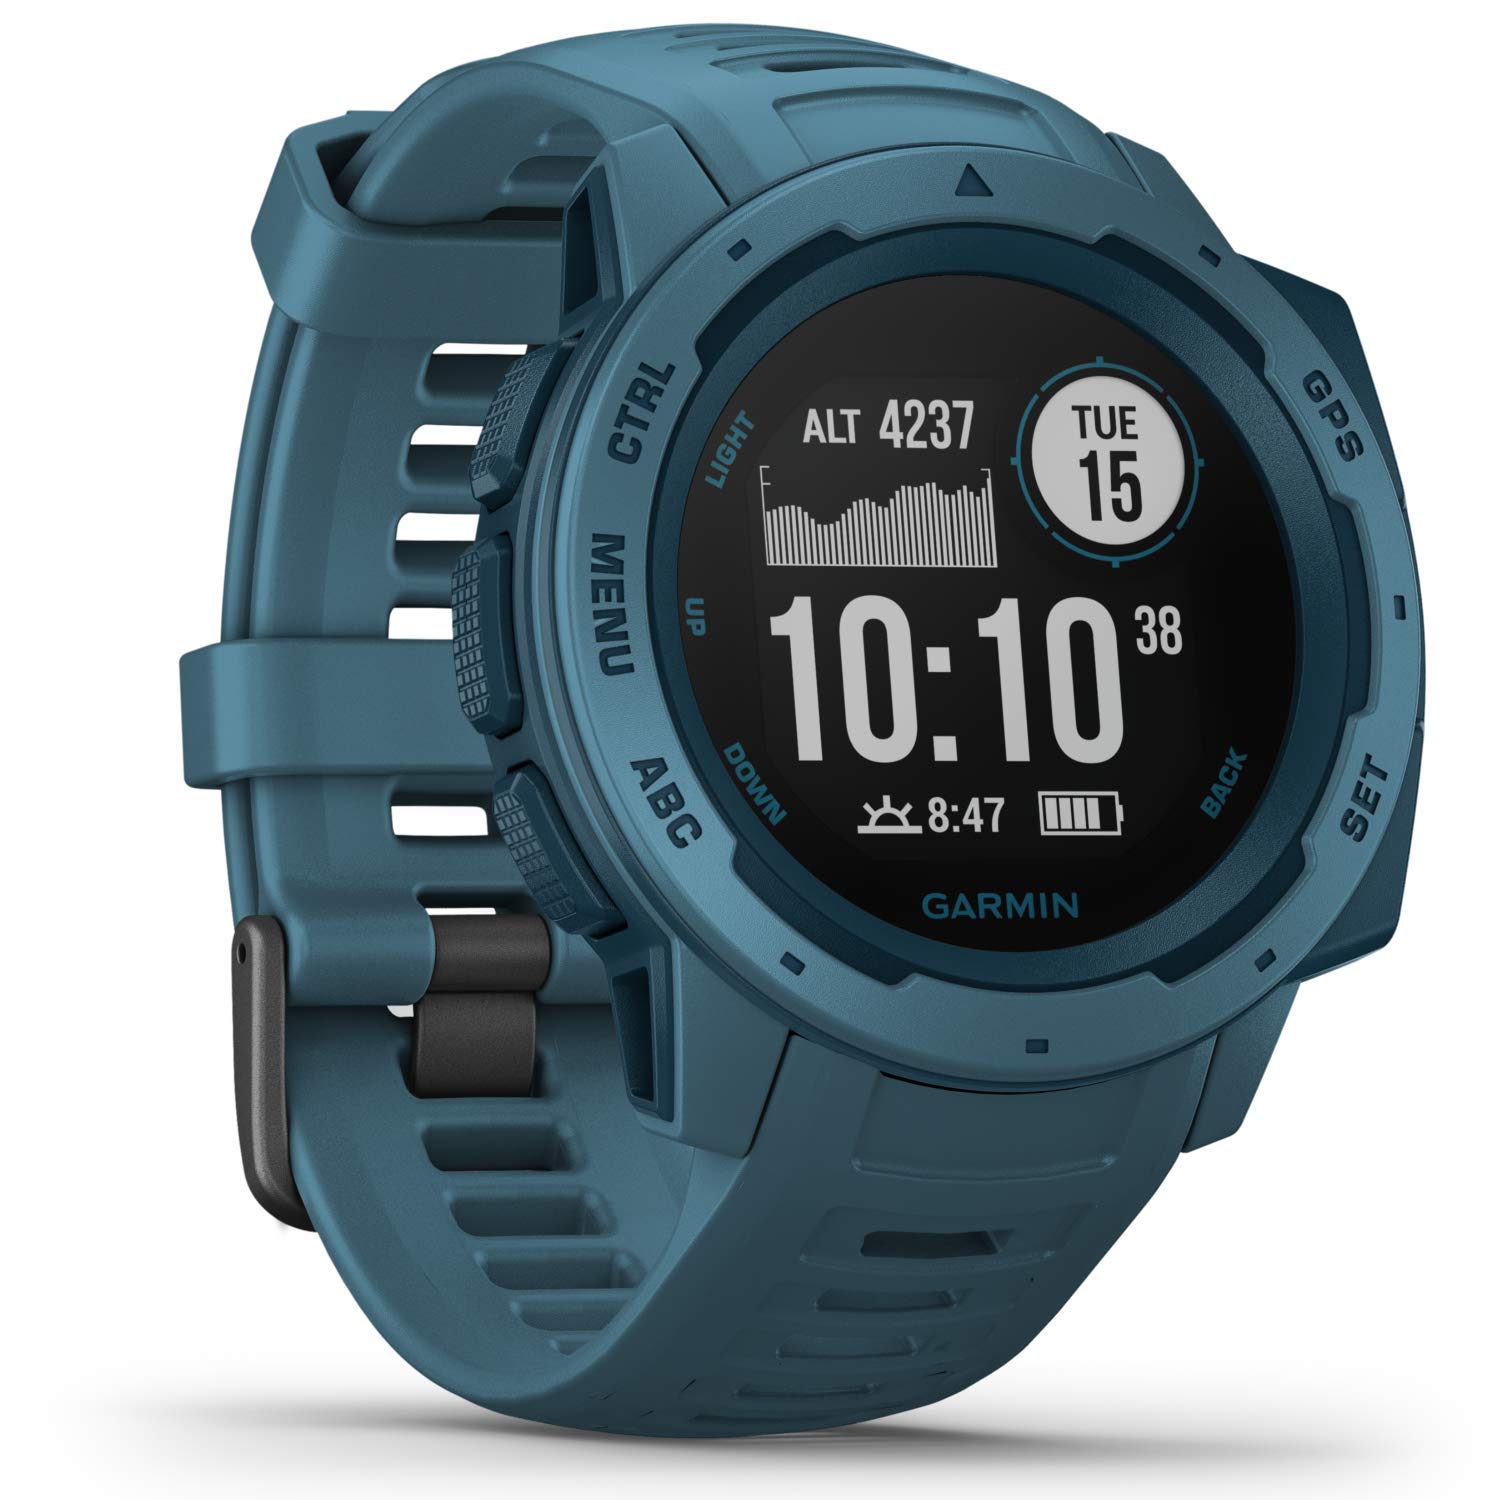 Deal Garmin S Instinct Outdoor Watch Drops To 150 For Black Friday Android Authority